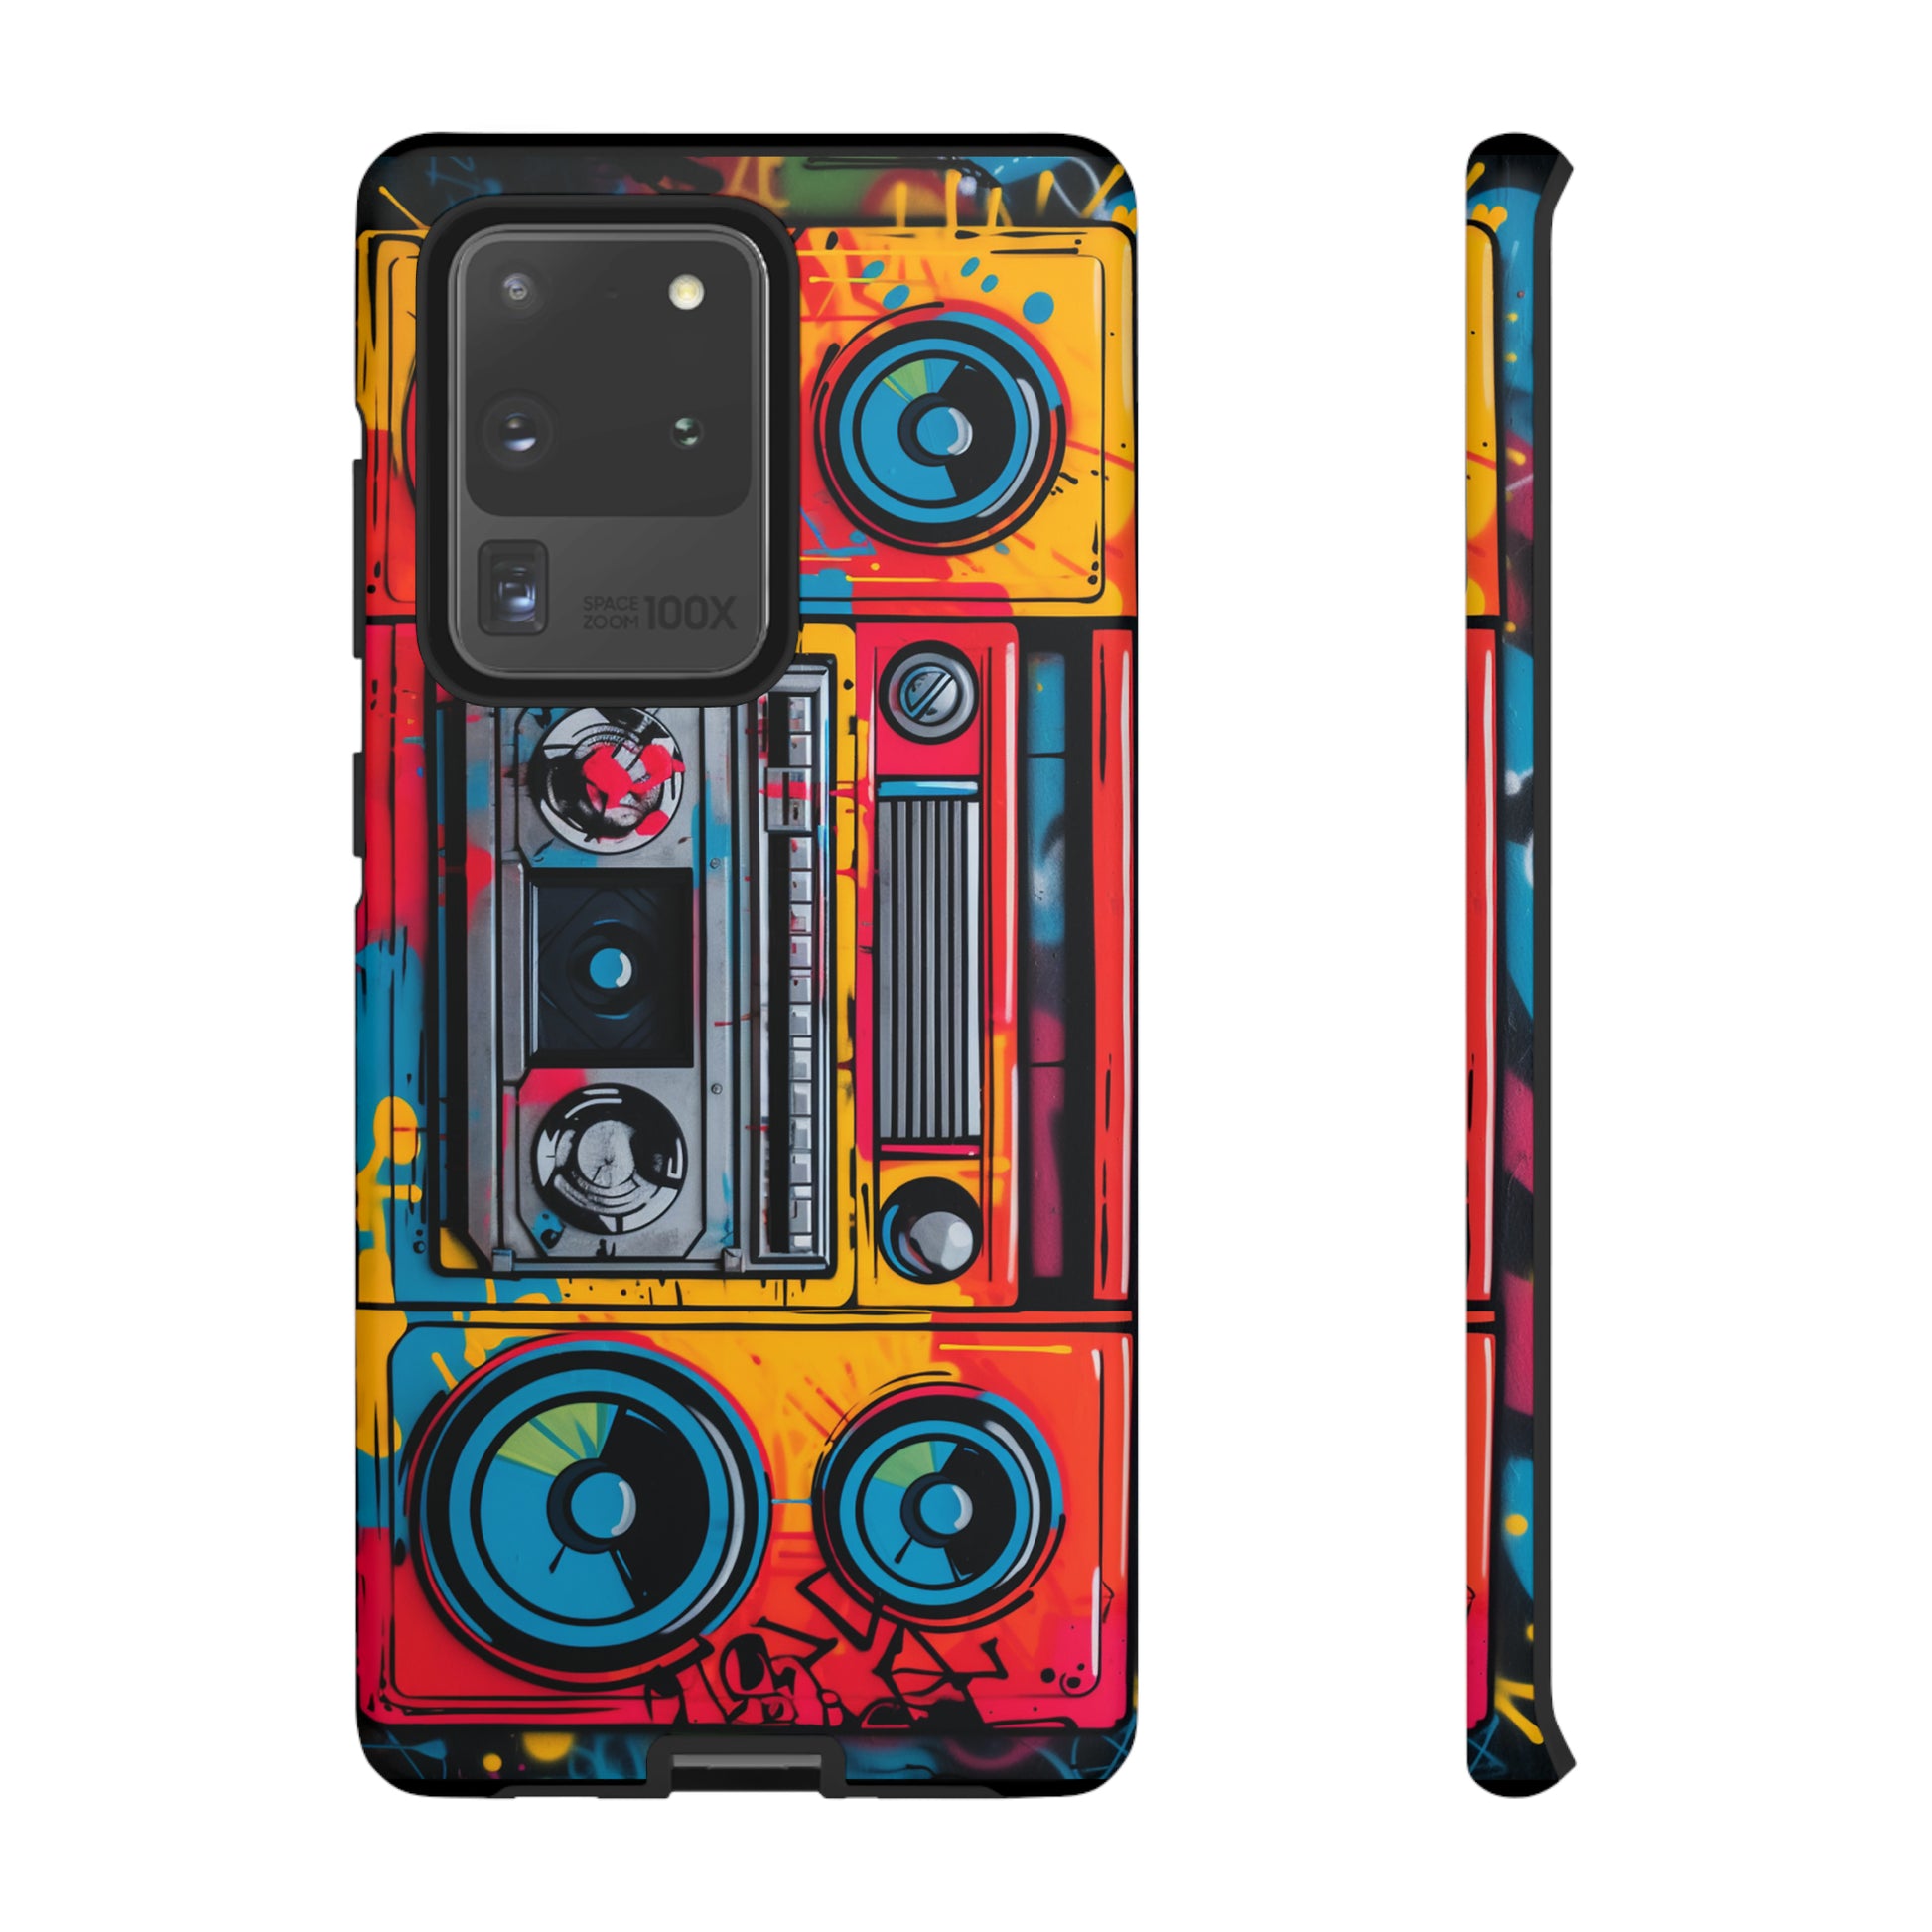 Retro style boombox design for iPhone 12